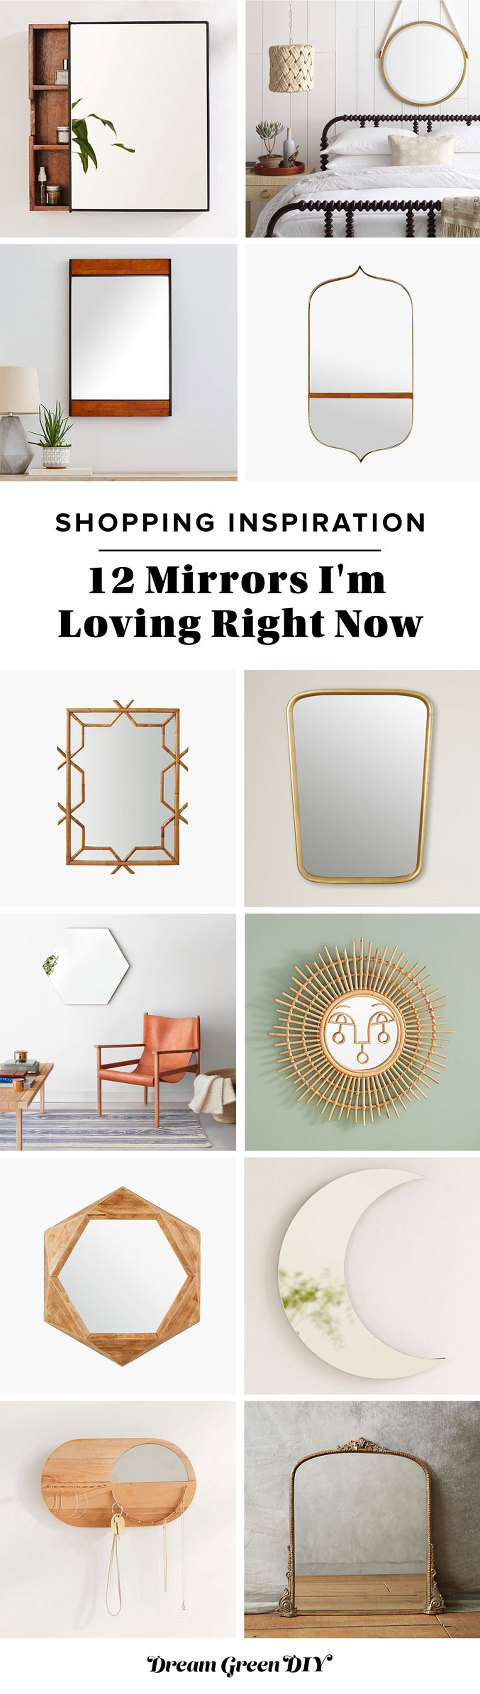 12 Mirrors I'm Loving Right Now